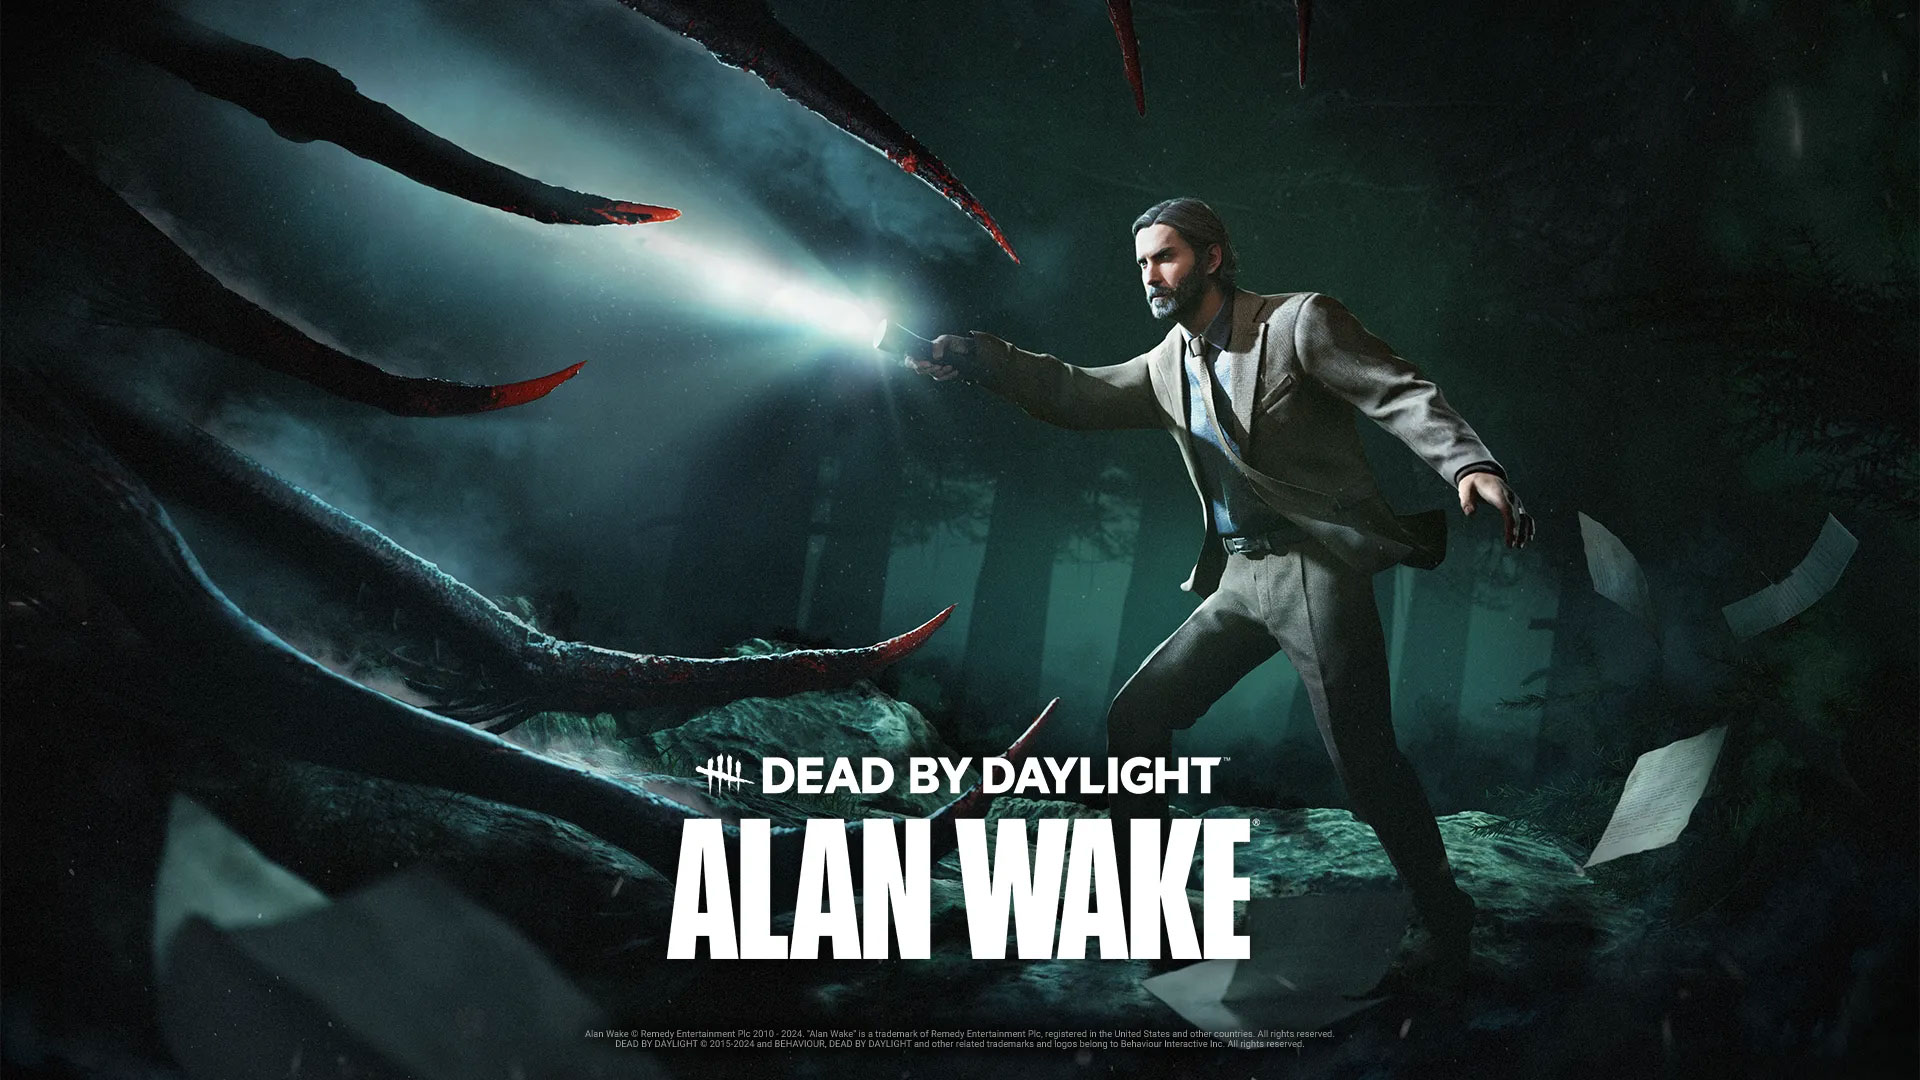 Alan Wake heads to Dead by Daylight on January 30